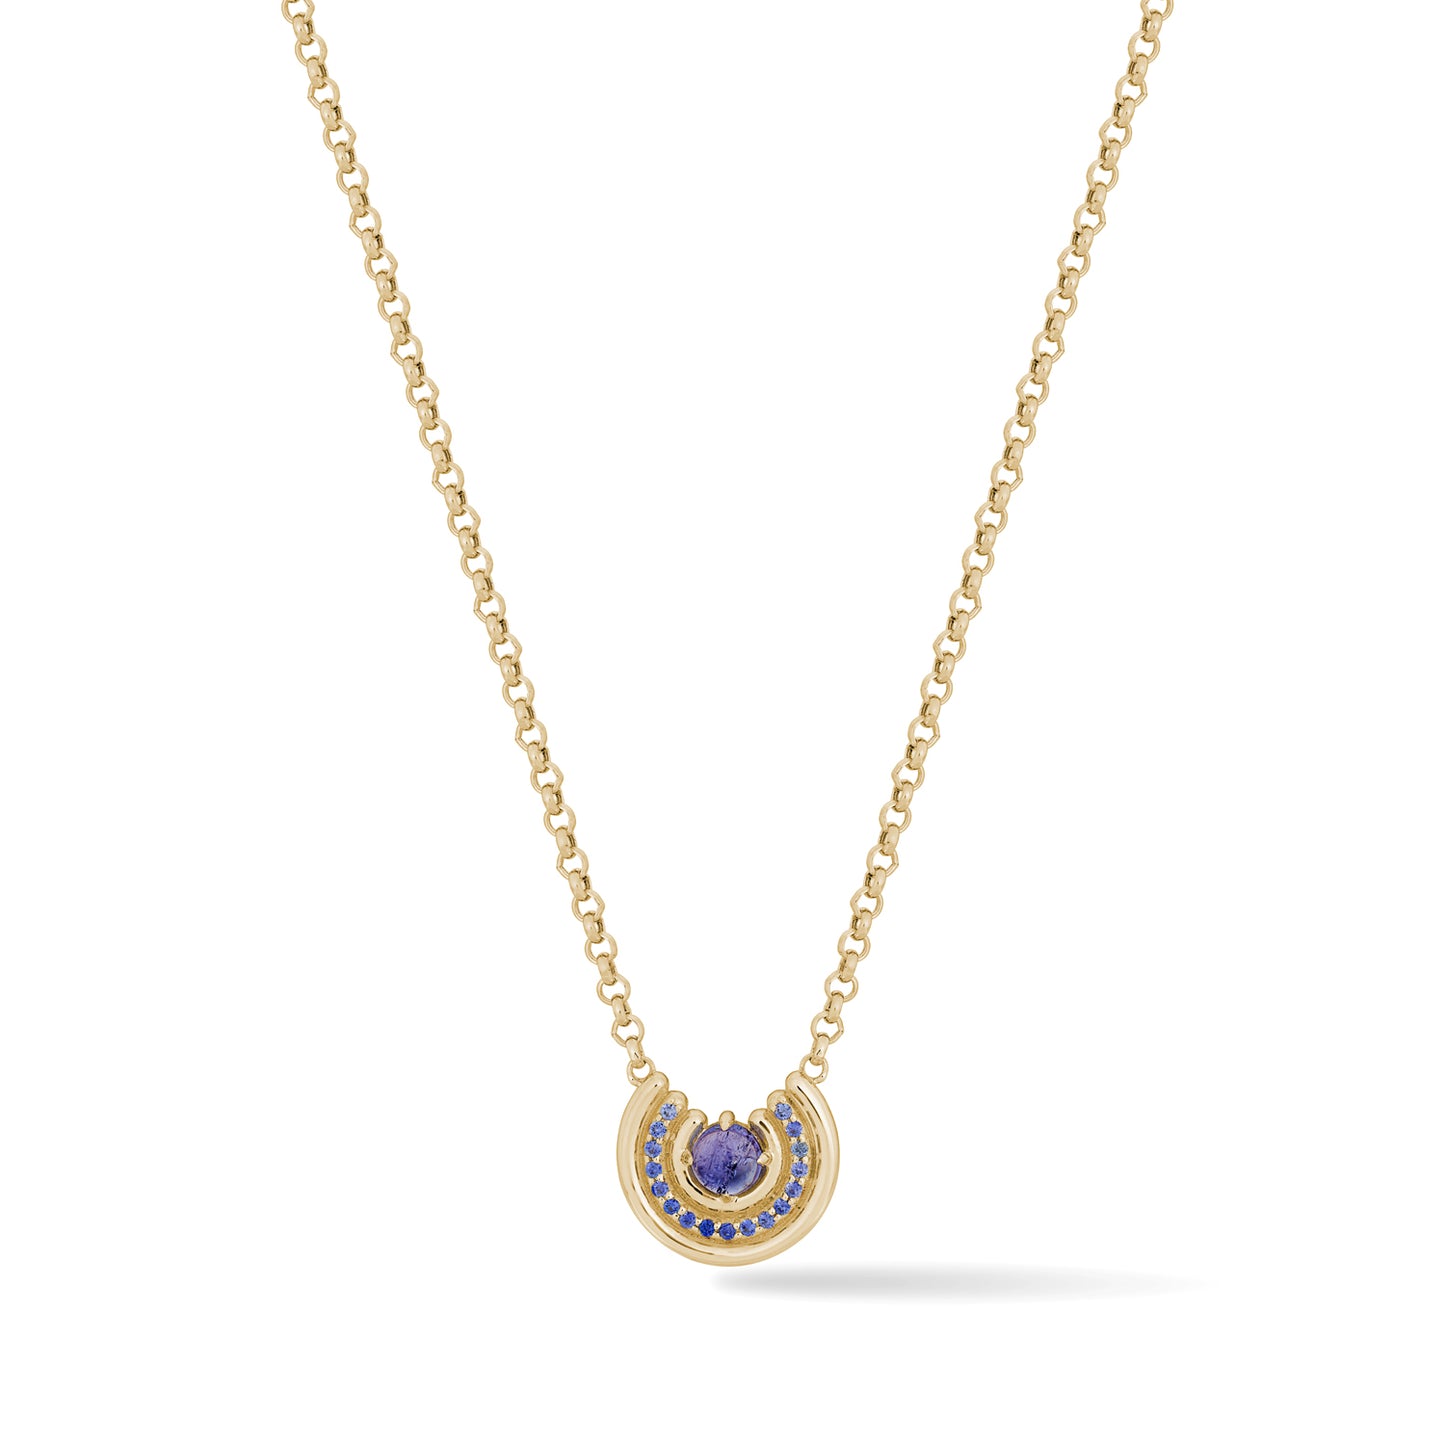 Load image into Gallery viewer, 14k gold pendant necklace, with tanzanite center stone, and a row of clue sapphires, on white background.
